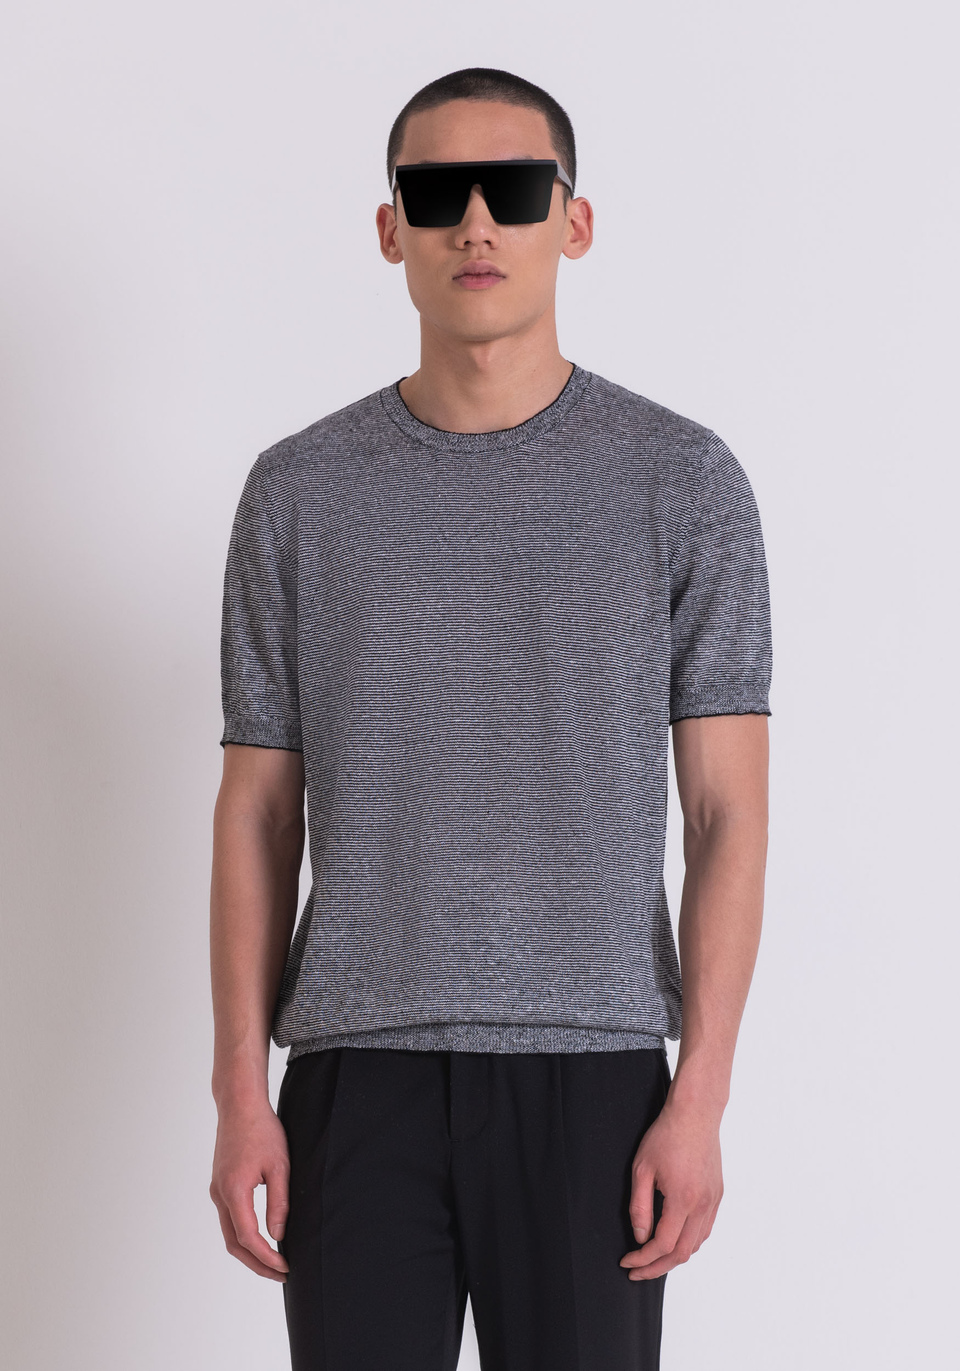 KNITTED SWEATER - Antony Morato Online Shop